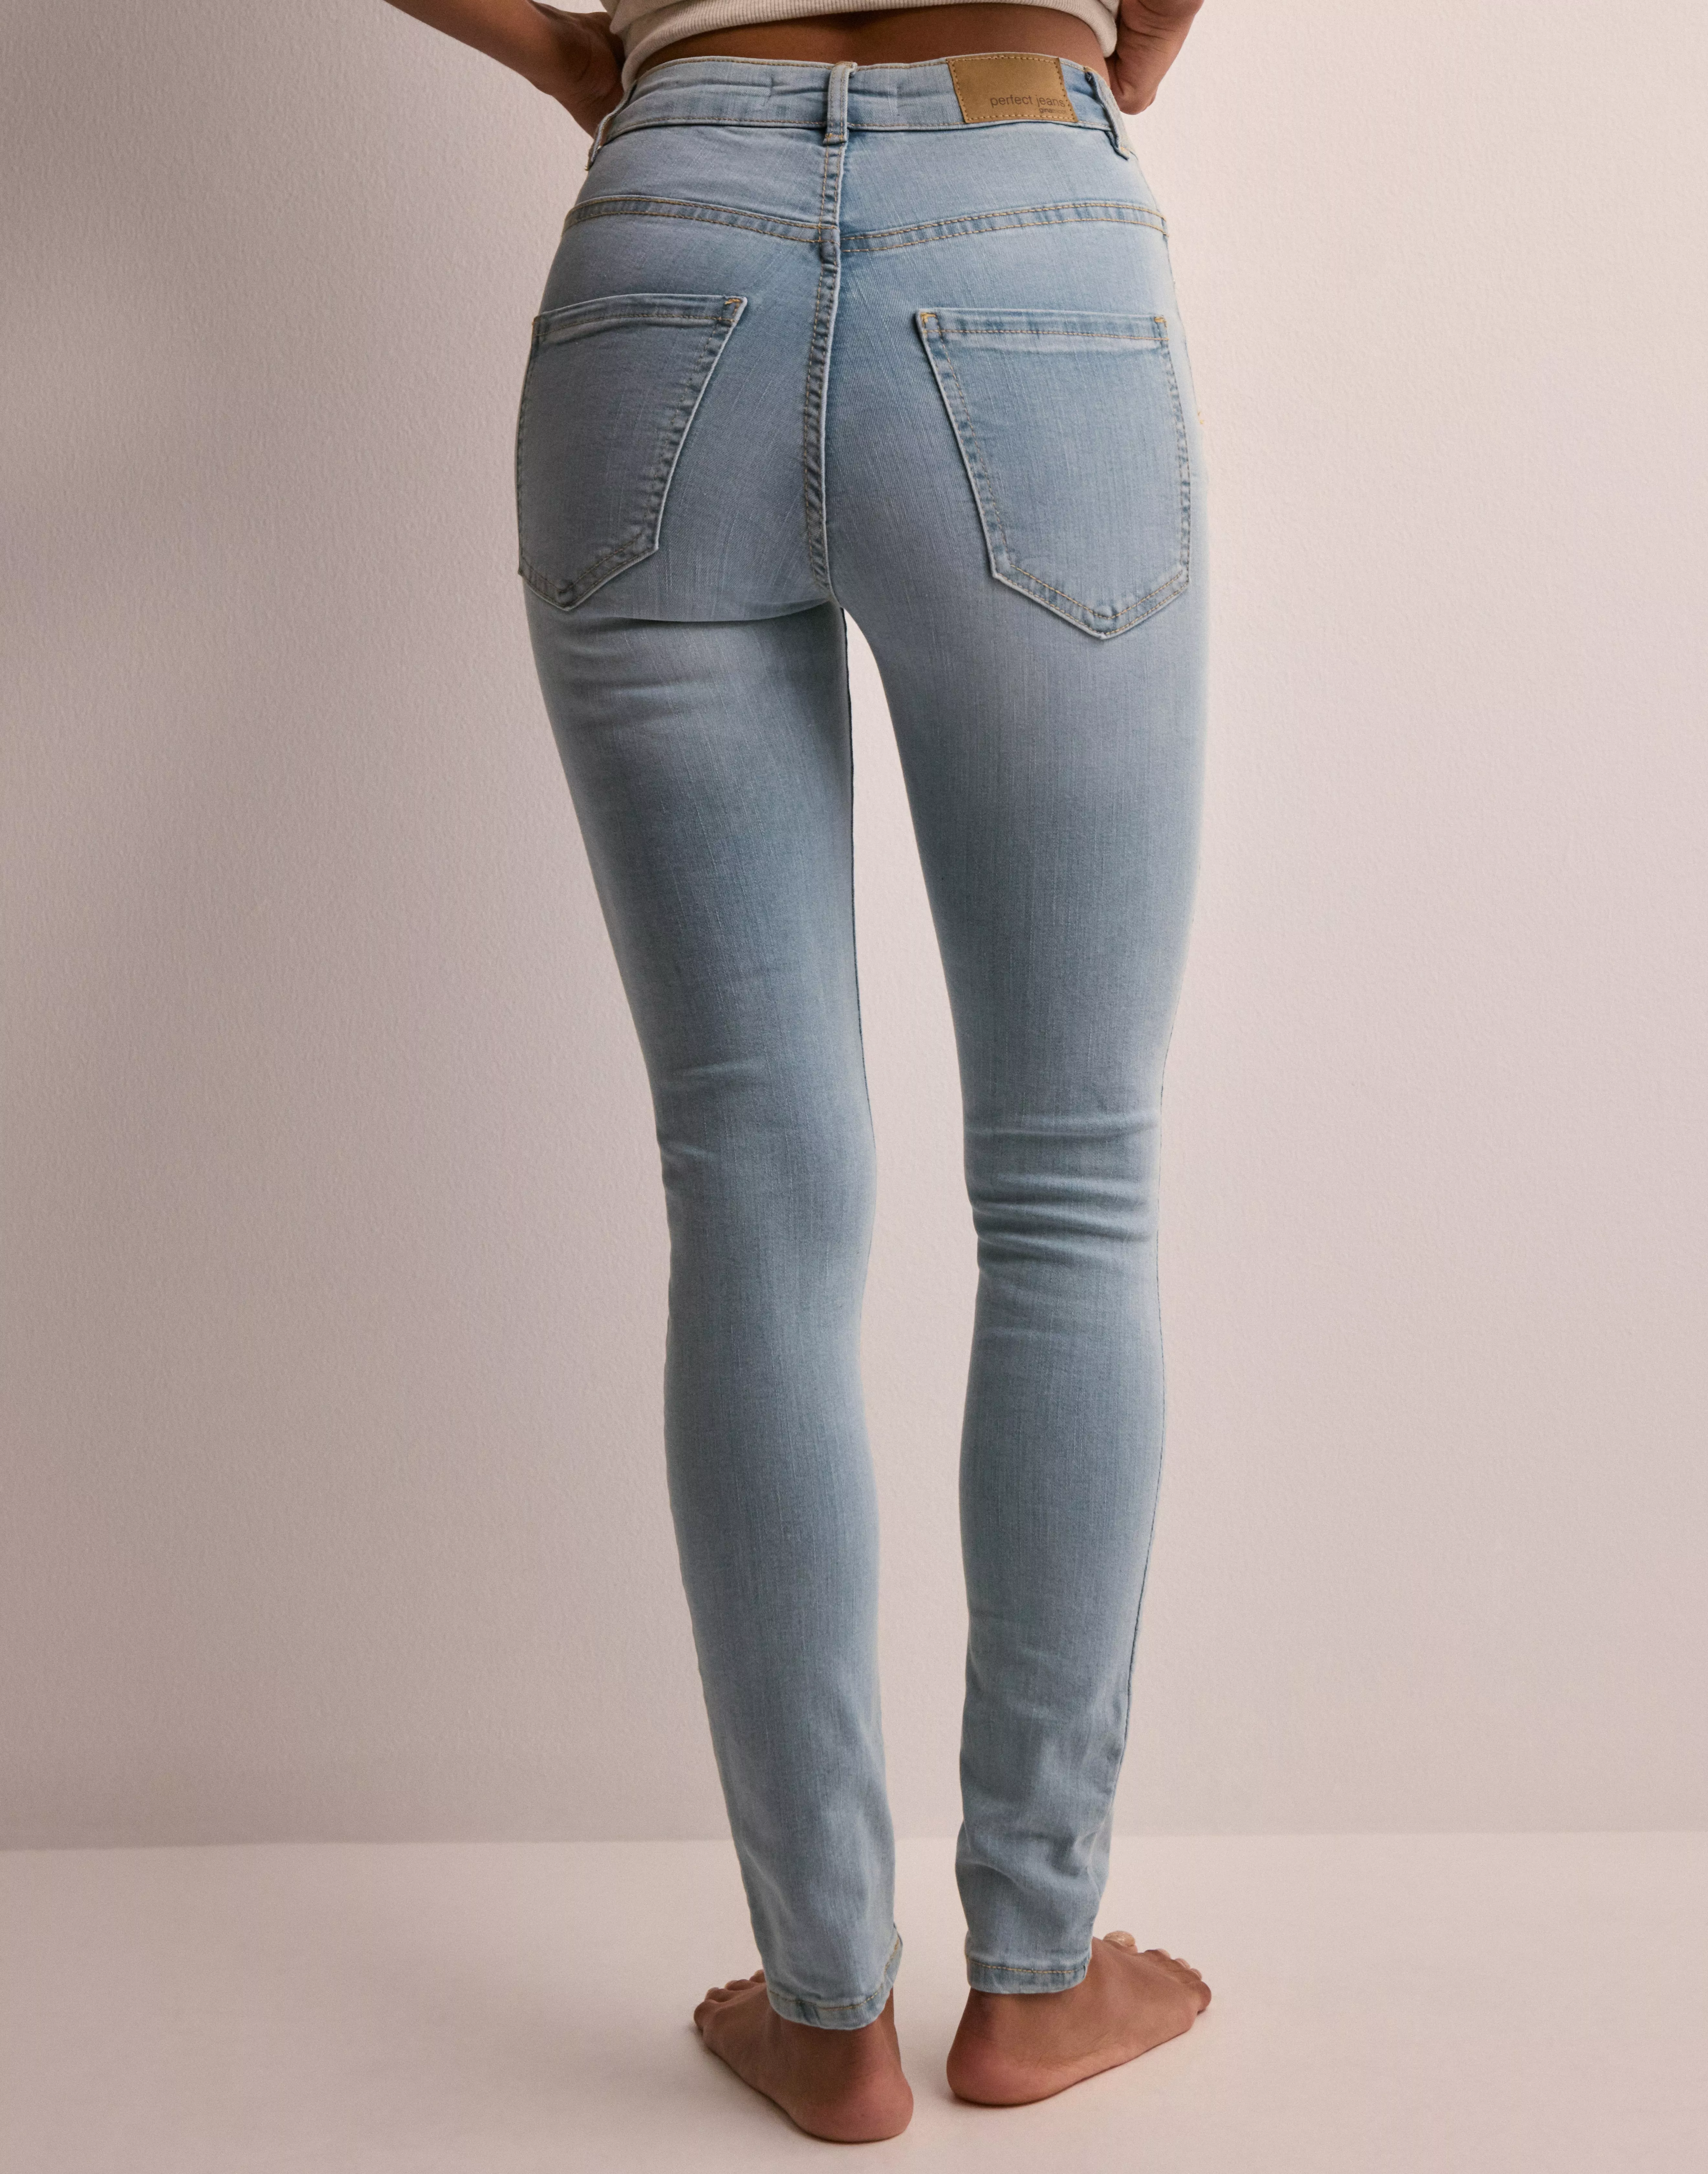 Buy Gina Tricot Molly High Waist Jeans - Blue |